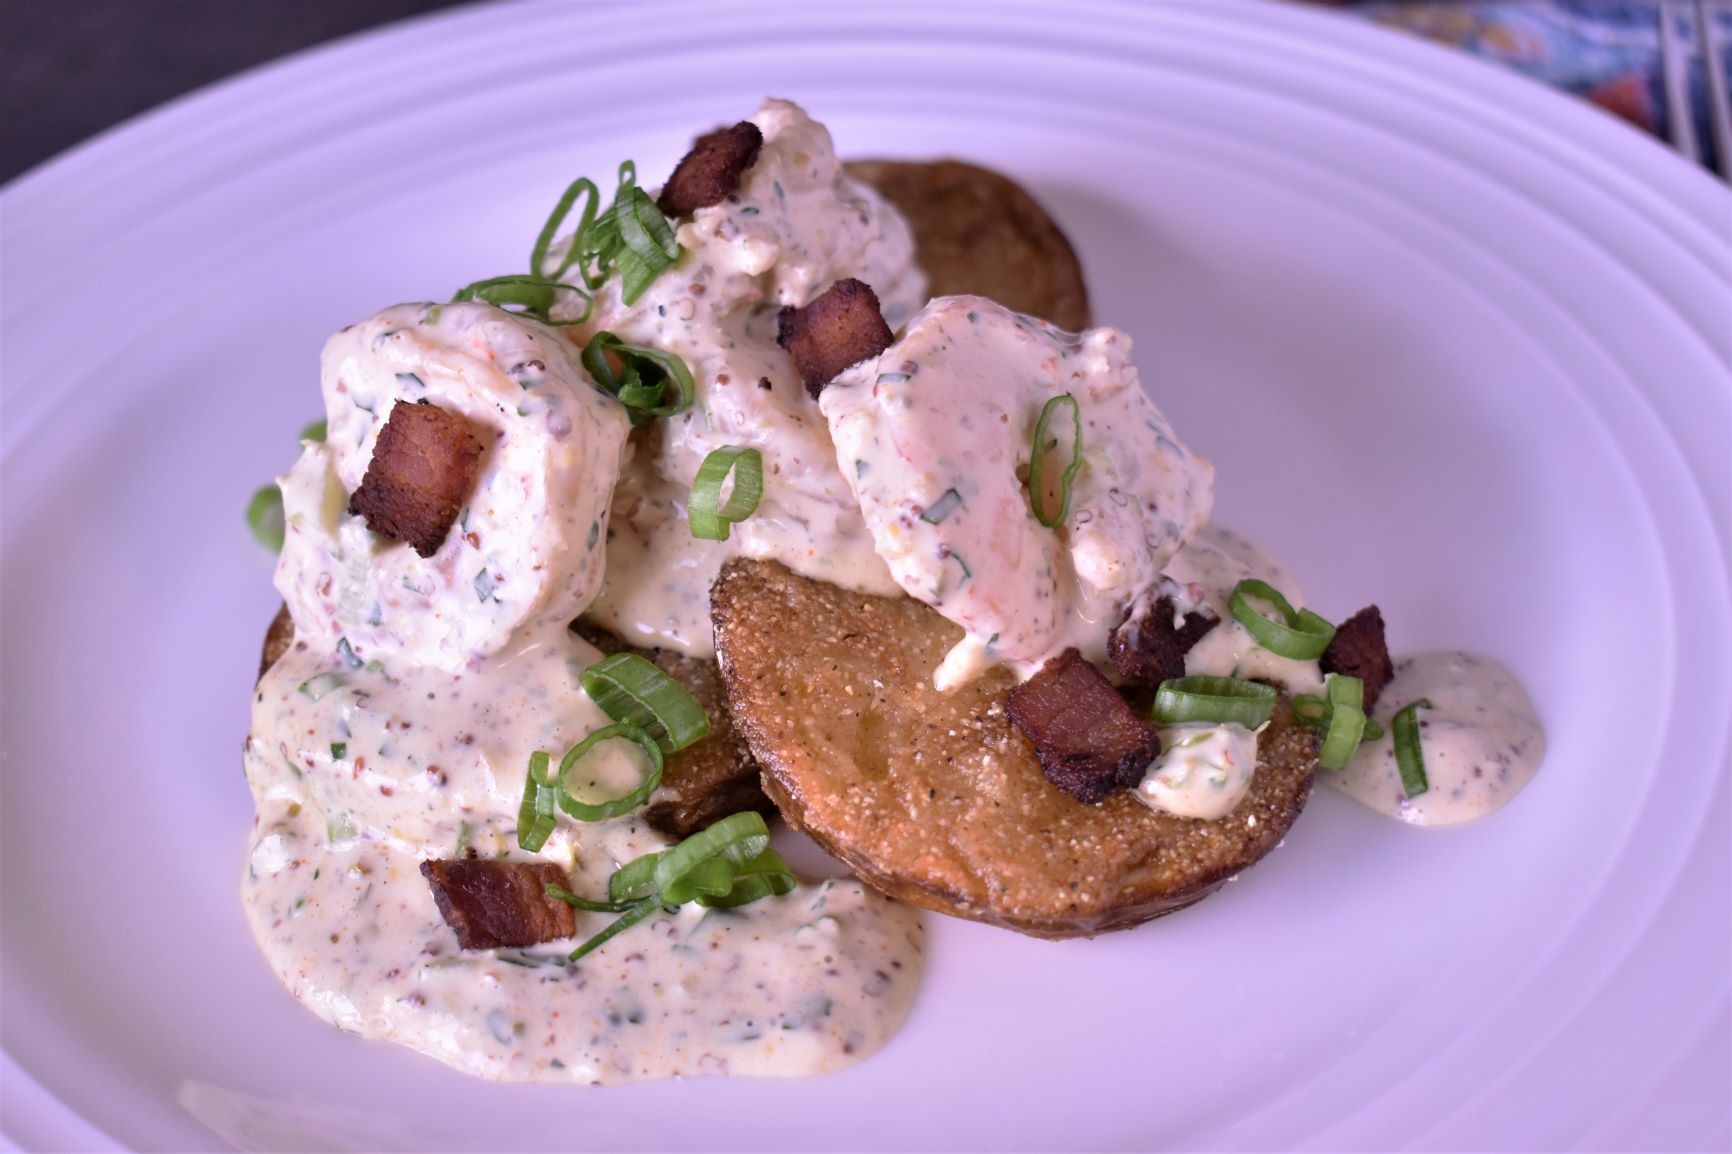 Fried Green Tomatoes with Shrimp Remoulade